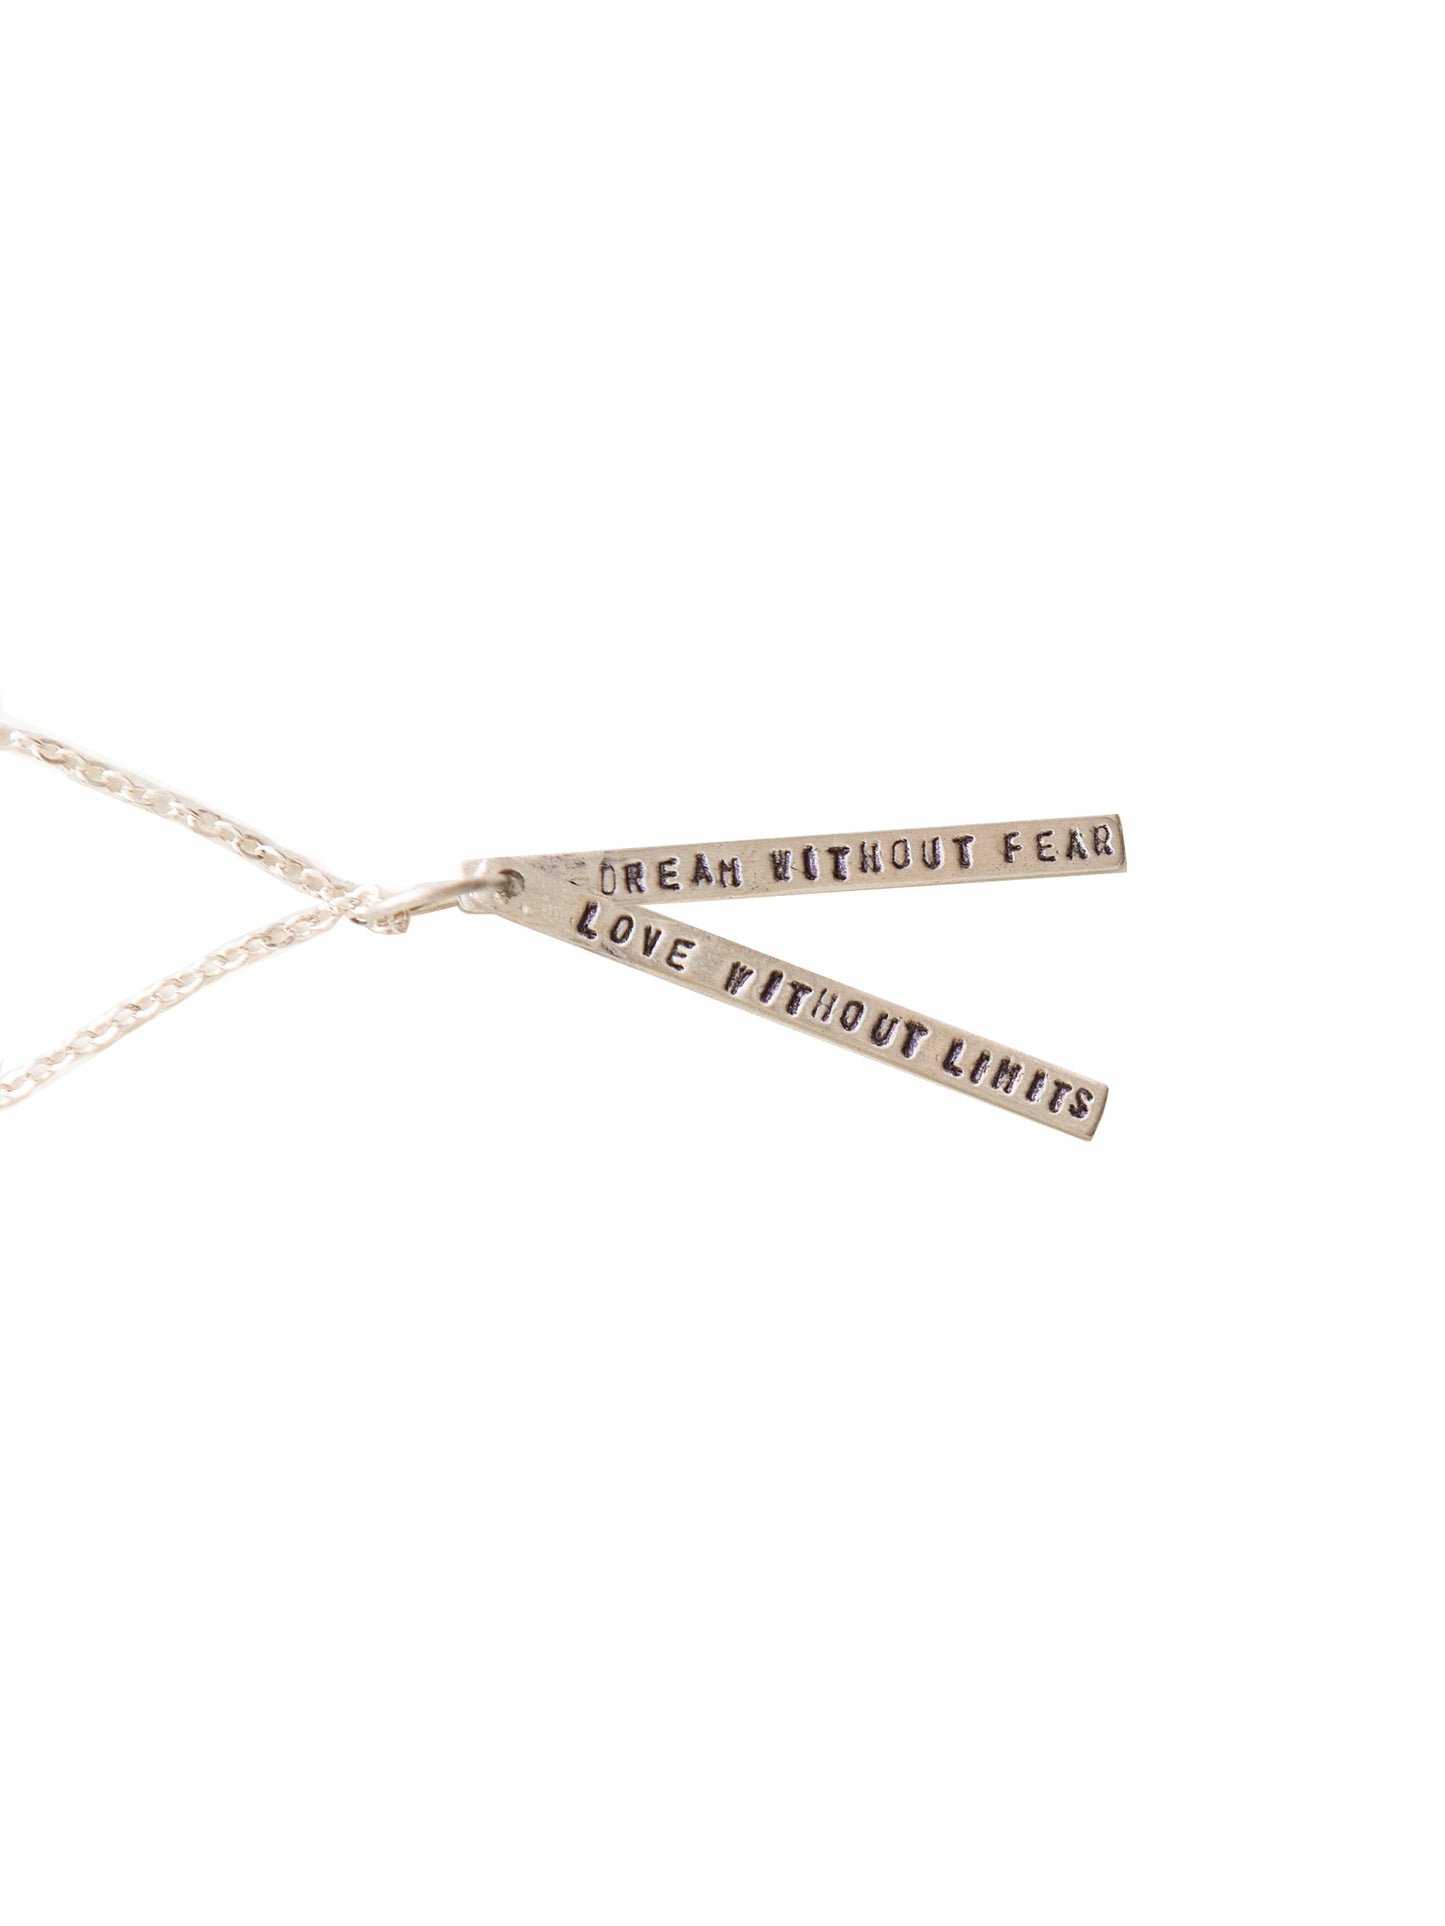 Chocolate & Steel Long-Bar Quote Necklace Dream Without Fear Weston Table